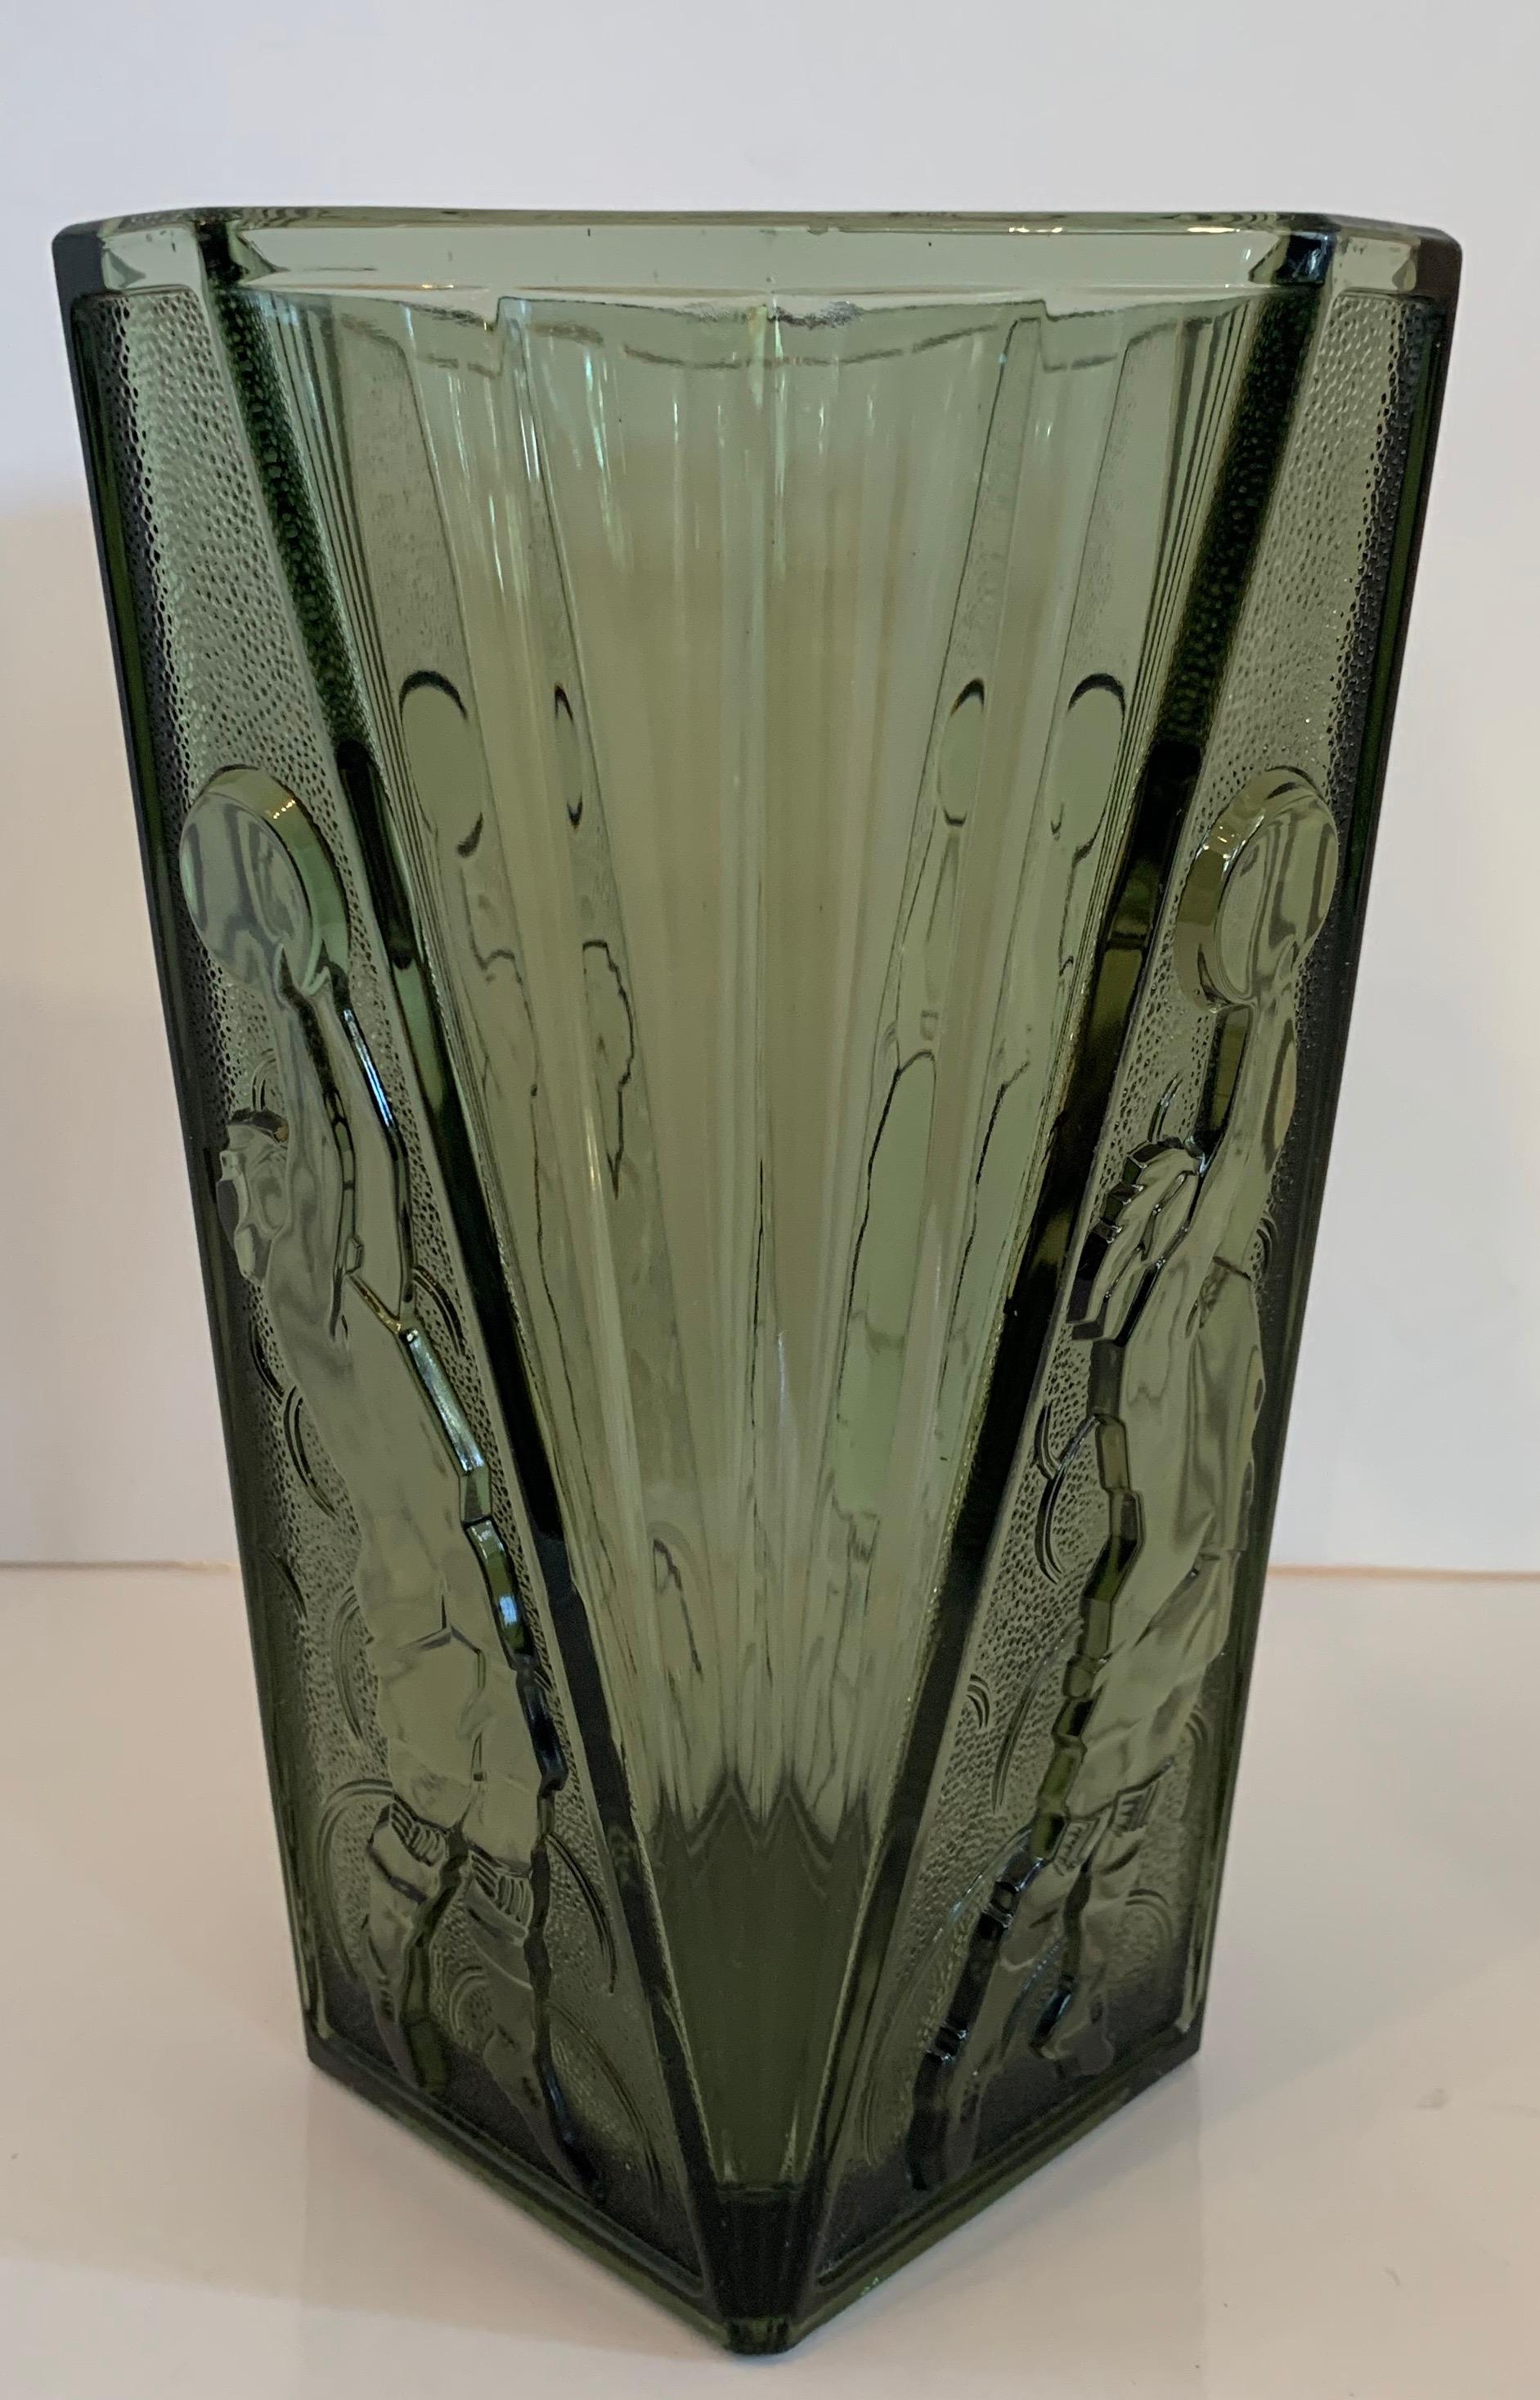 Wonderful Art Deco Val Saint Lambert Luxval Vase Basketball Player Crystal Vase In Good Condition For Sale In Roslyn, NY